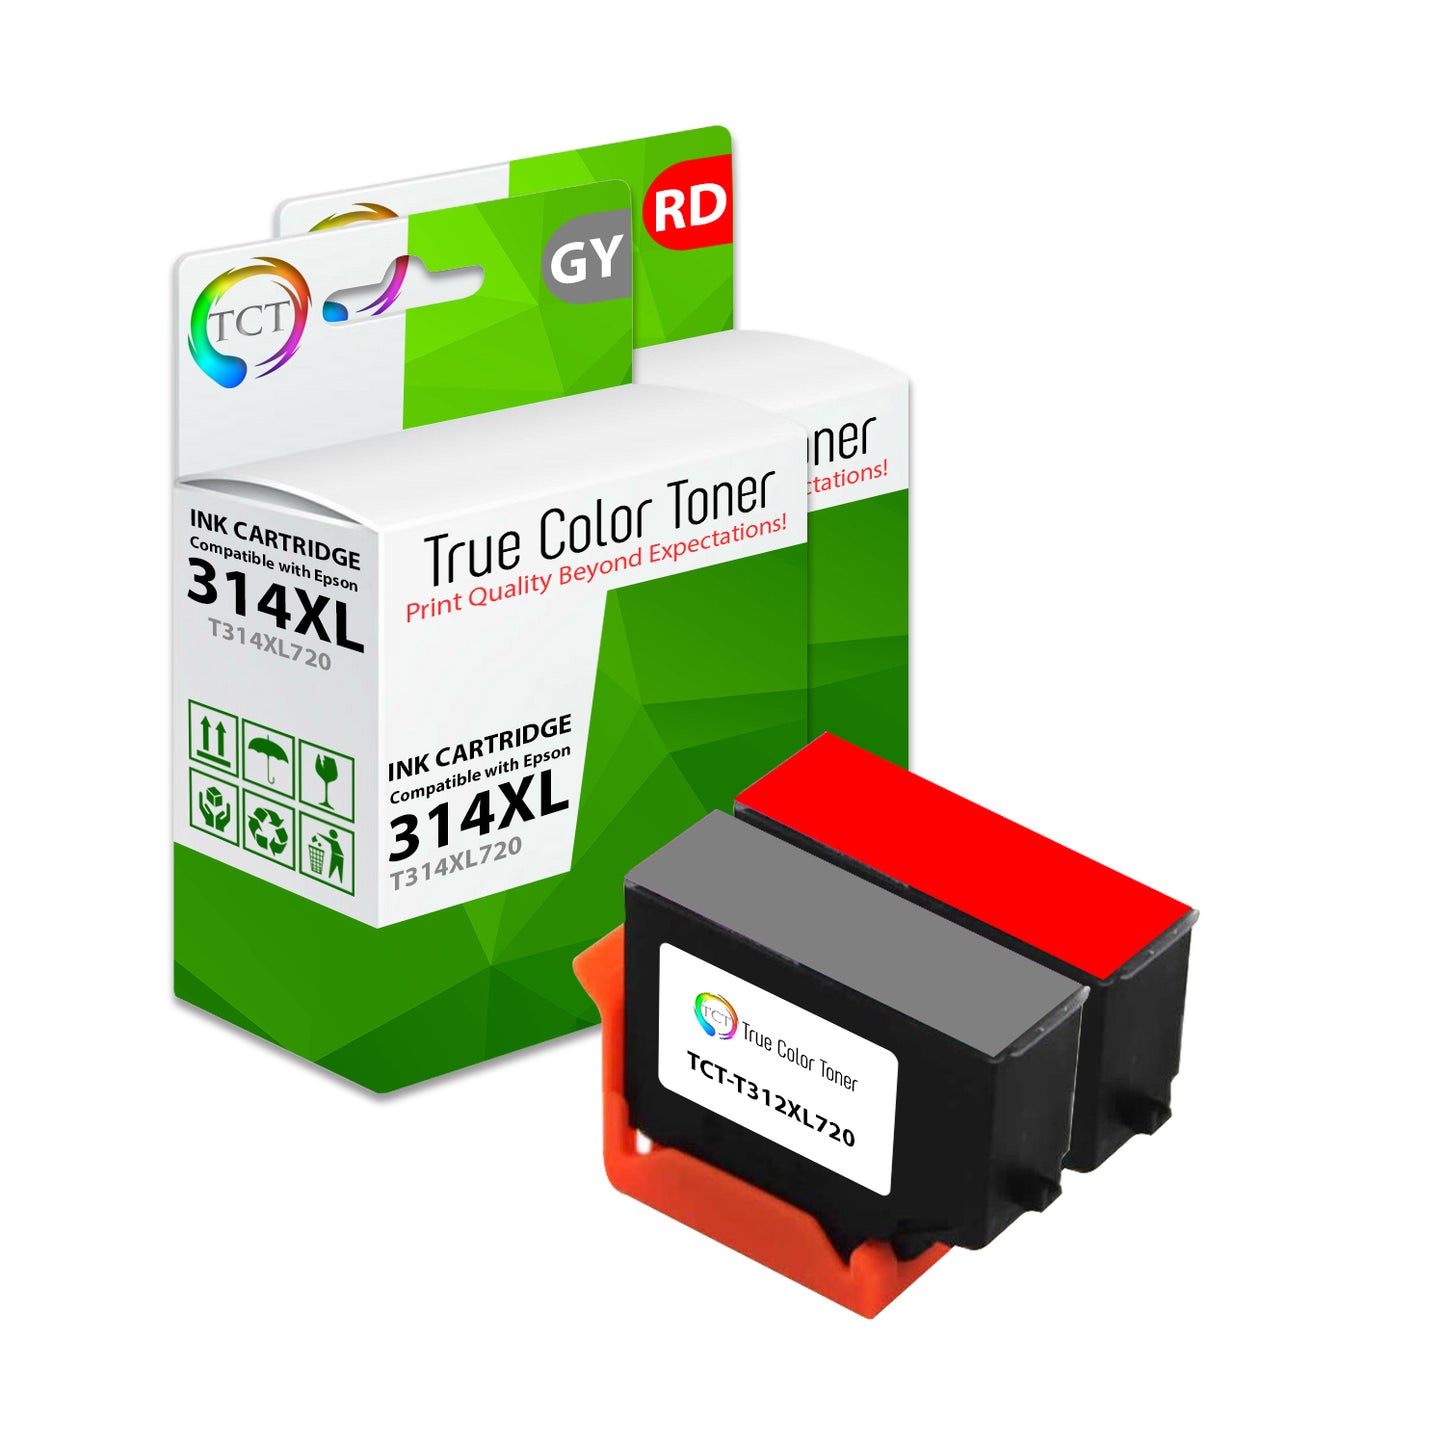 TCT Remanufactured High Yield Ink Cartridge Replacement for the Epson 312XL Series - 2 Pack (LC, LM)